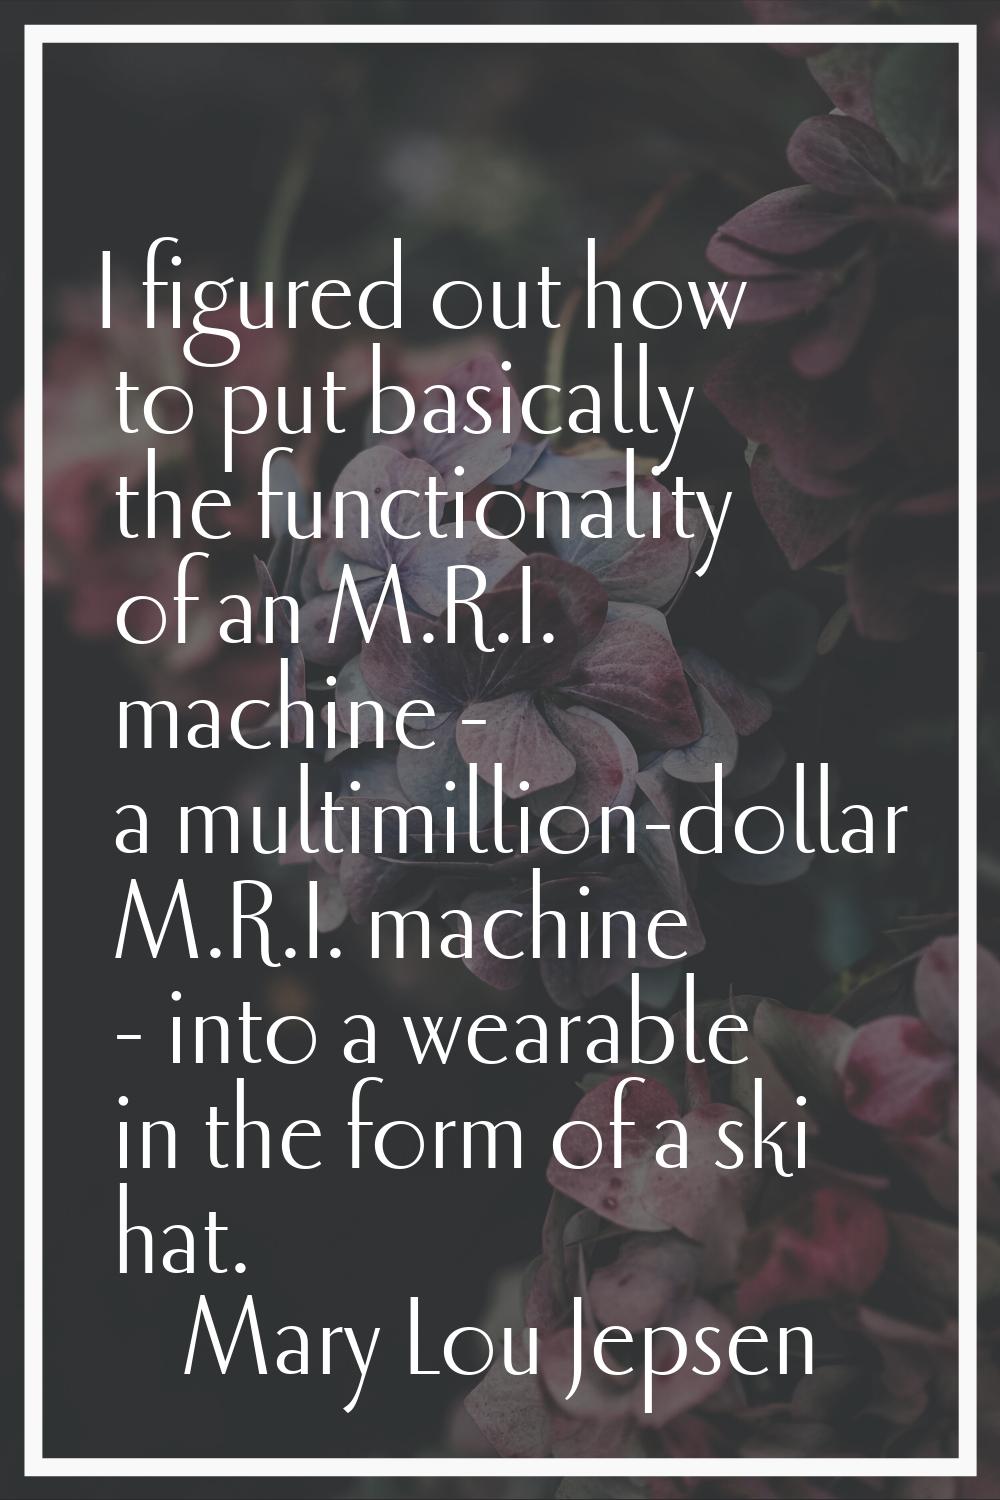 I figured out how to put basically the functionality of an M.R.I. machine - a multimillion-dollar M